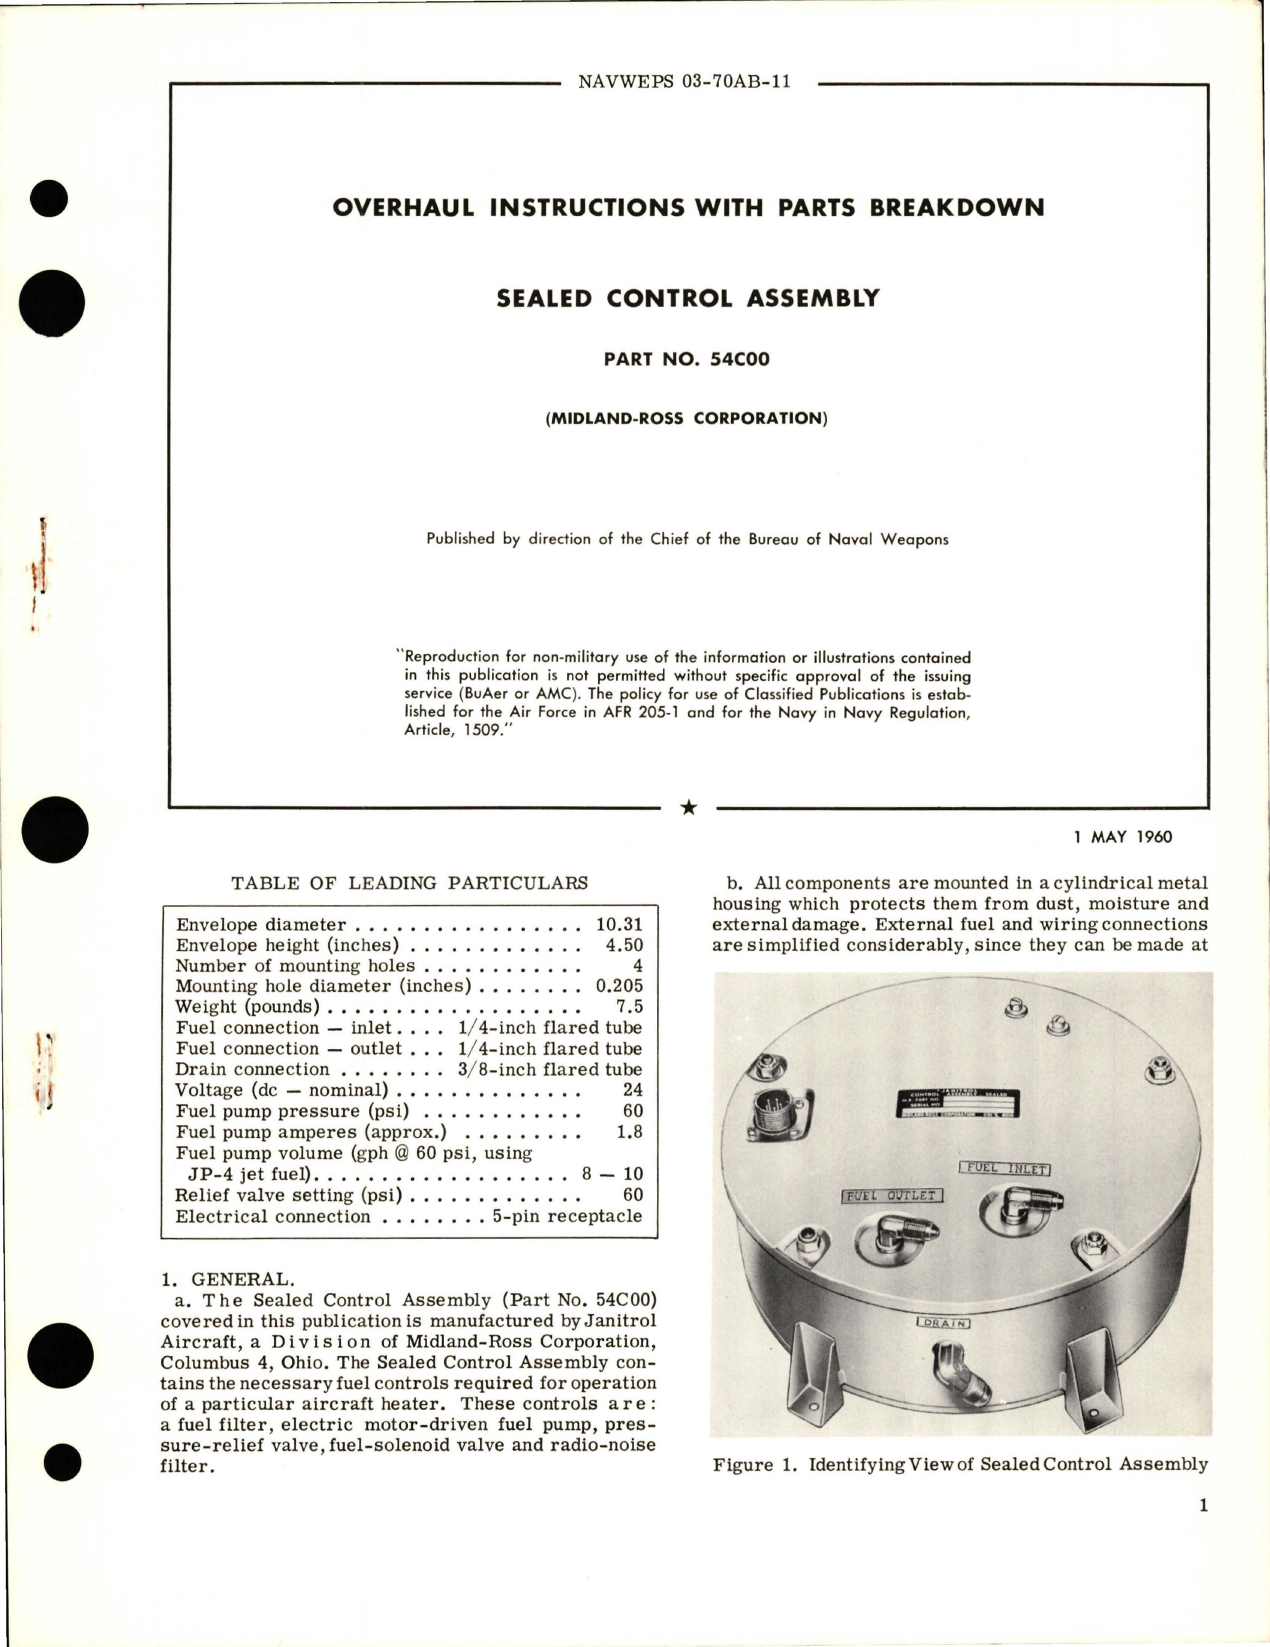 Sample page 1 from AirCorps Library document: Overhaul Instructions with Parts Breakdown for Sealed Control Assembly - Part 54C00